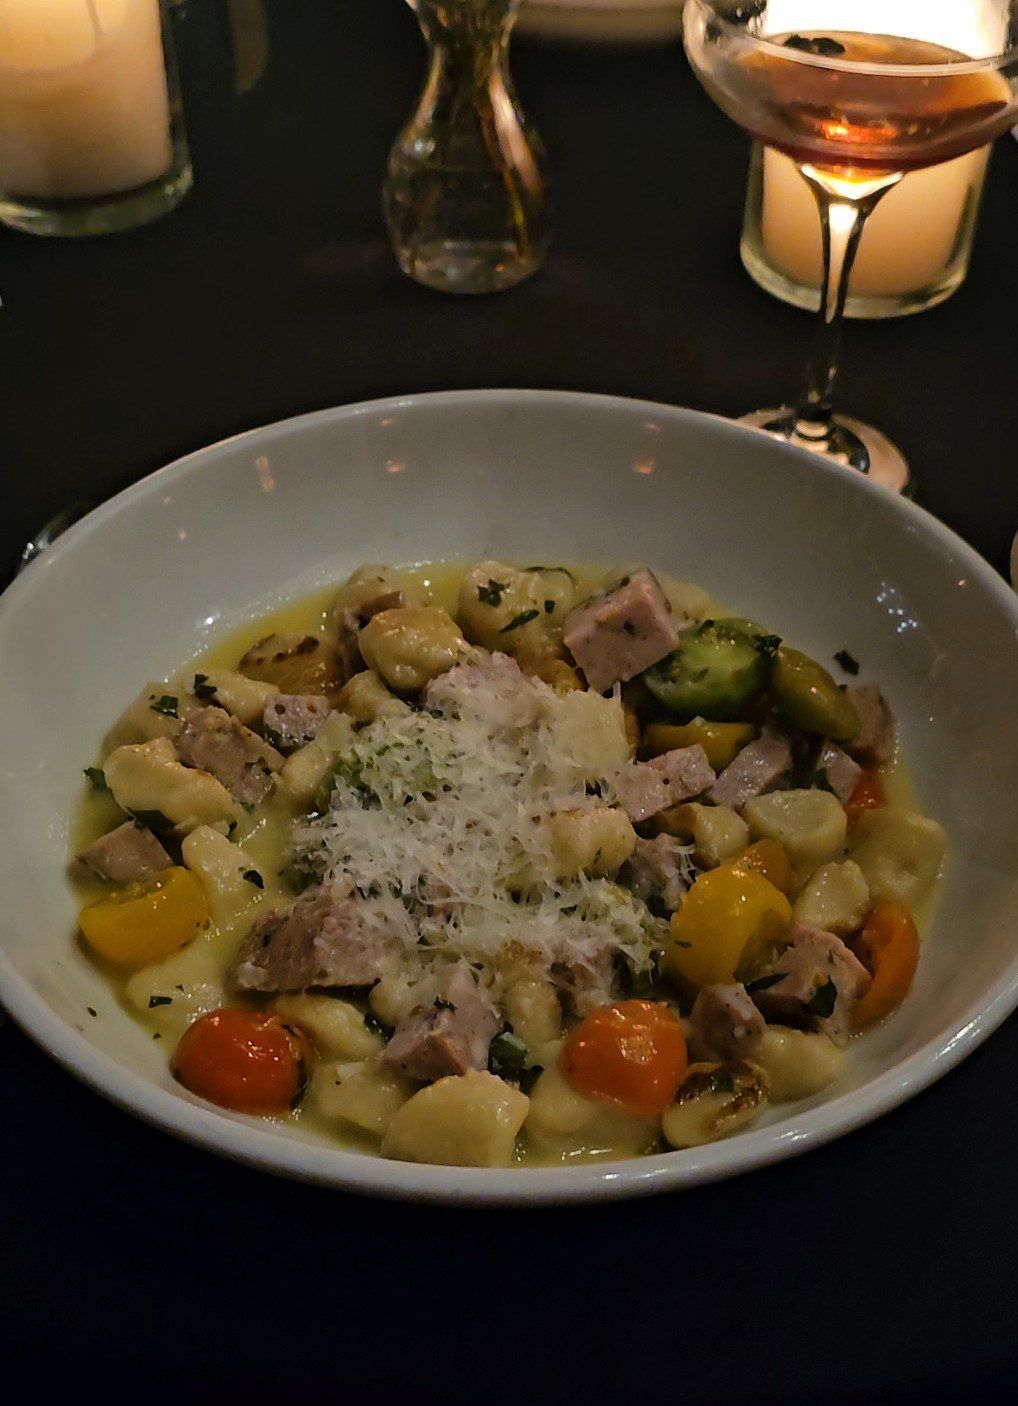 Gnocci and vegatables served at the Italian Alleia in Chattanooga, TN downtown review.